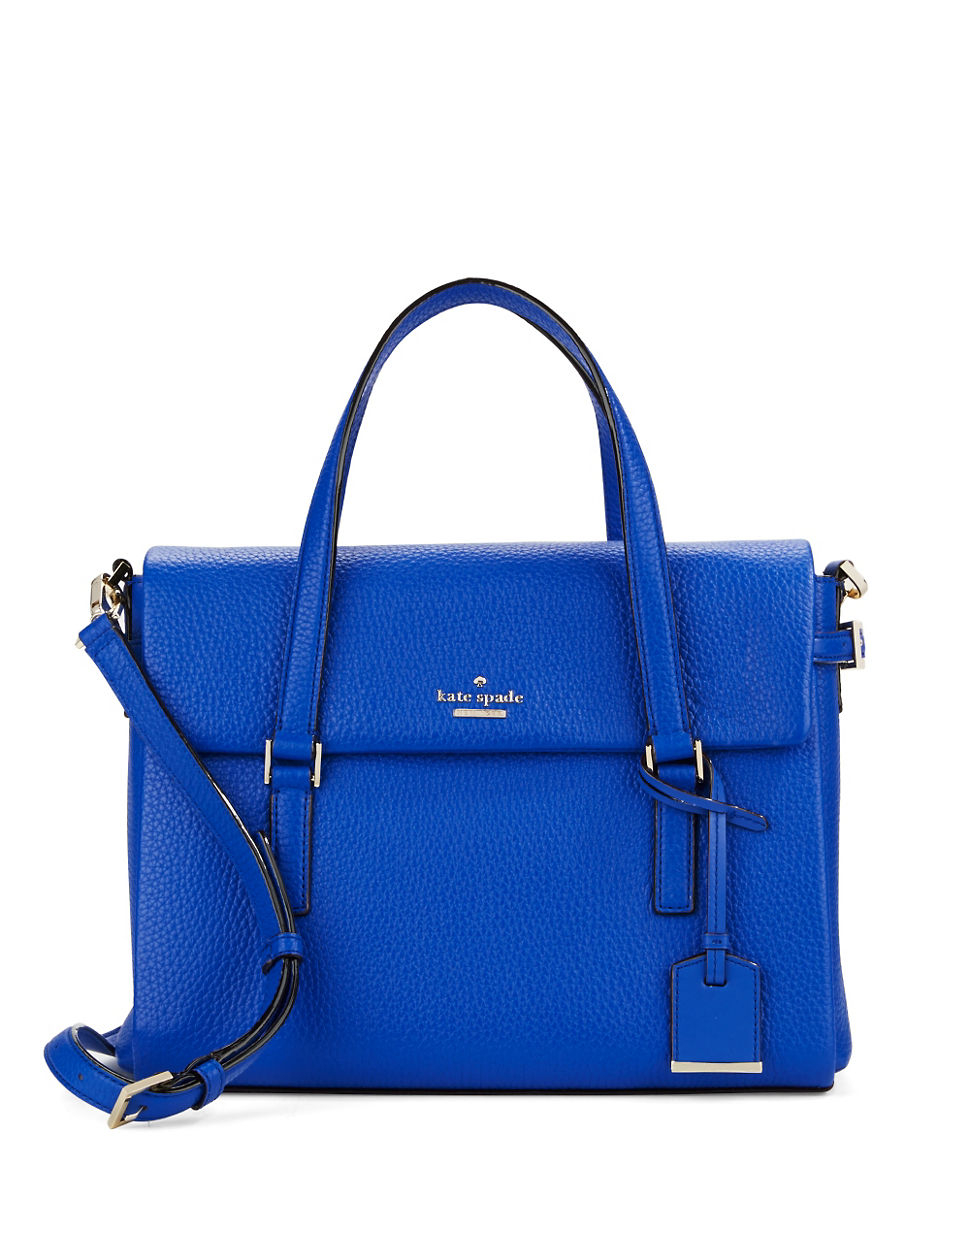 Kate spade Small Leslie Leather Satchel in Blue (Island Deep) | Lyst